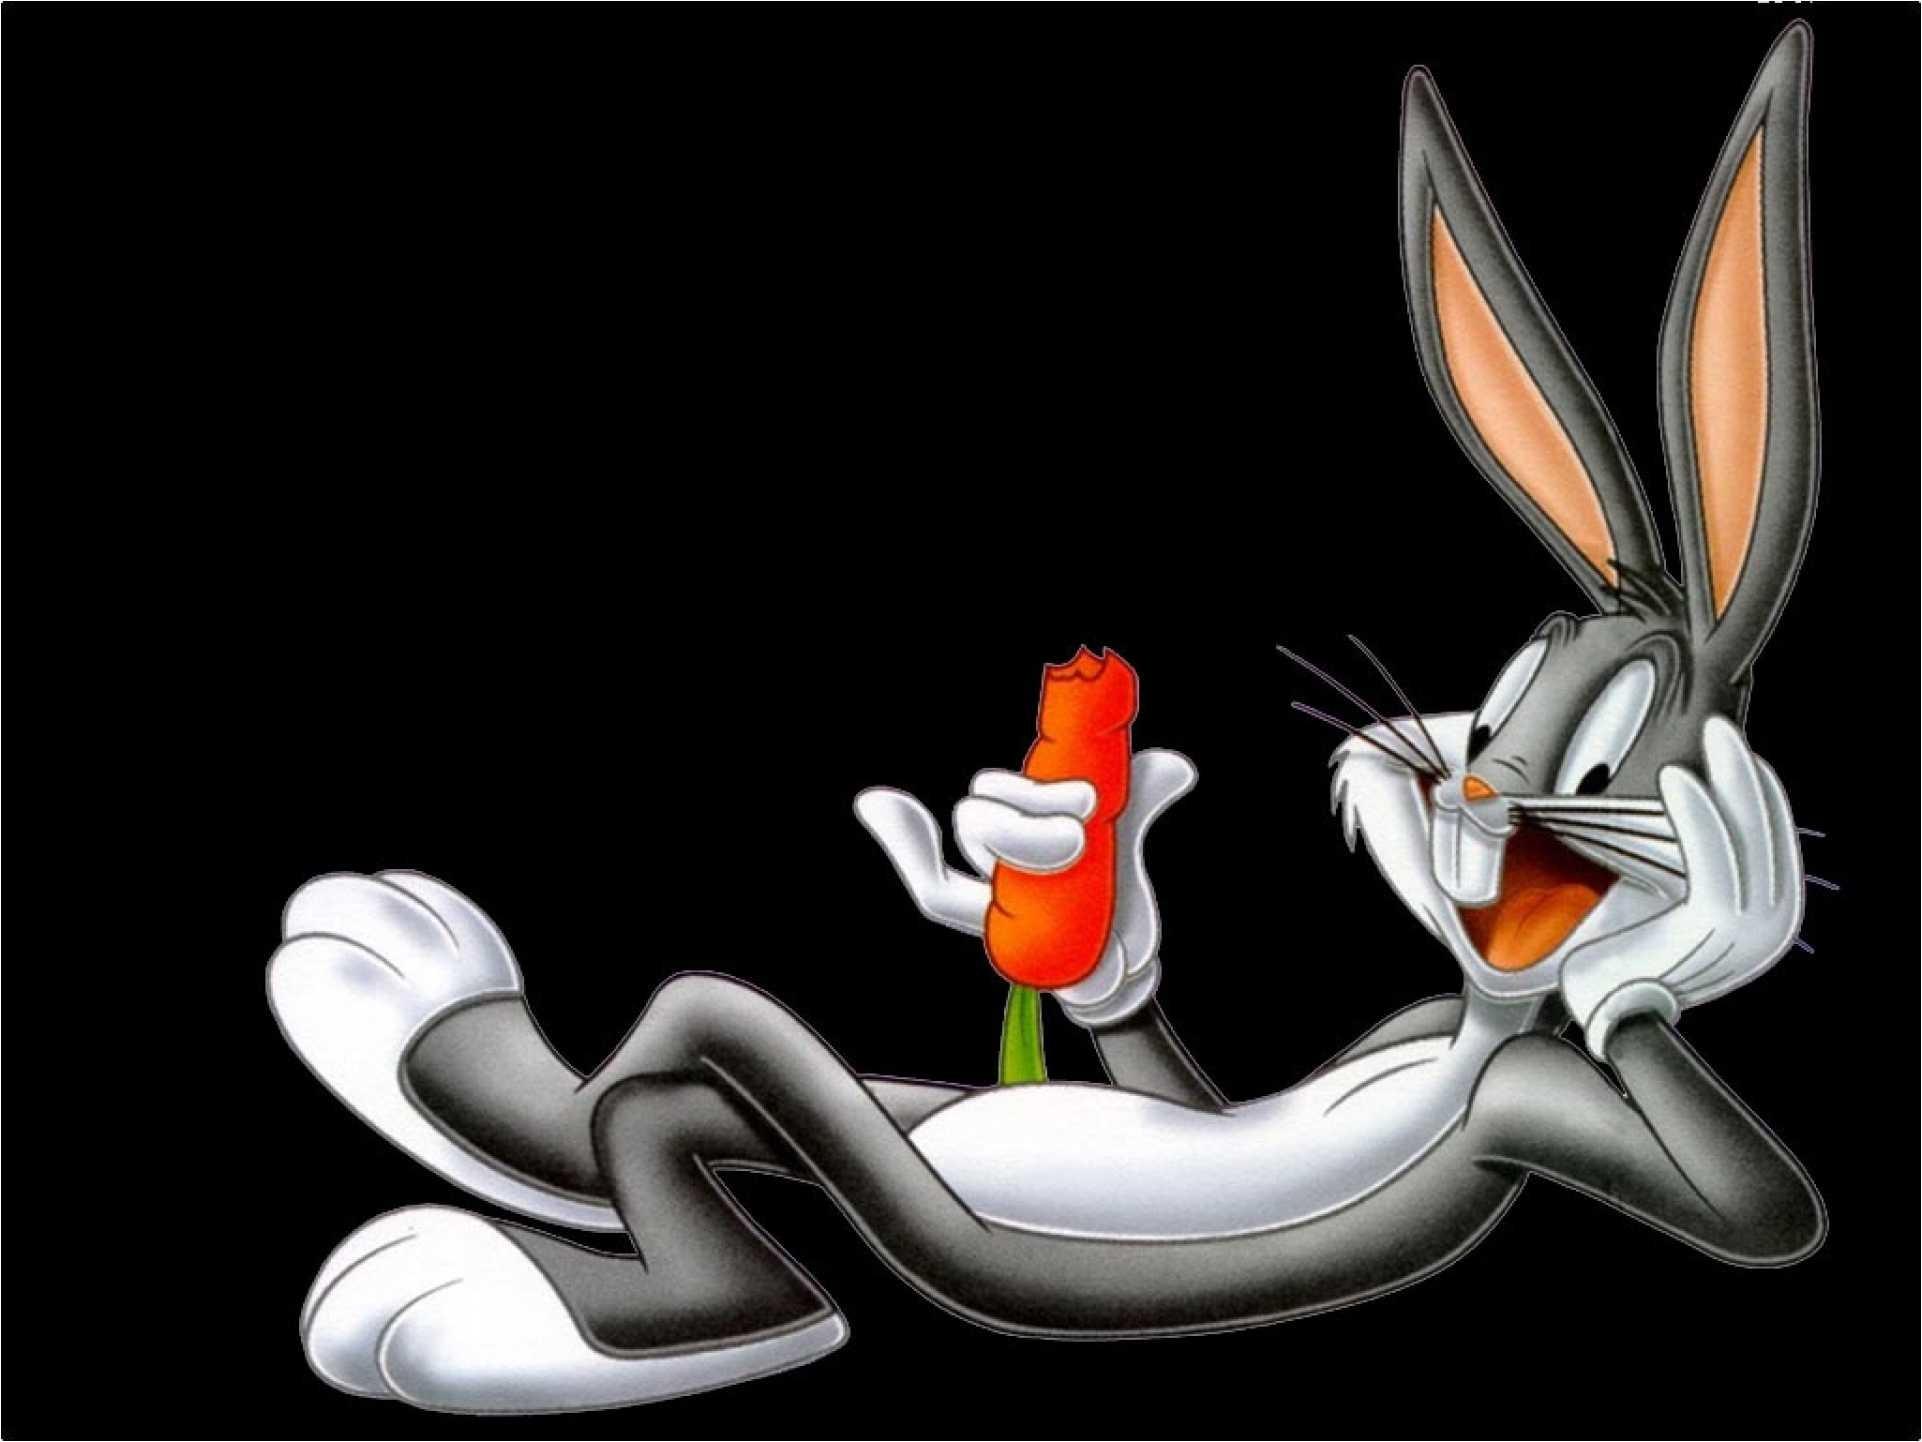 Bugs Bunny Wallpaper background picture